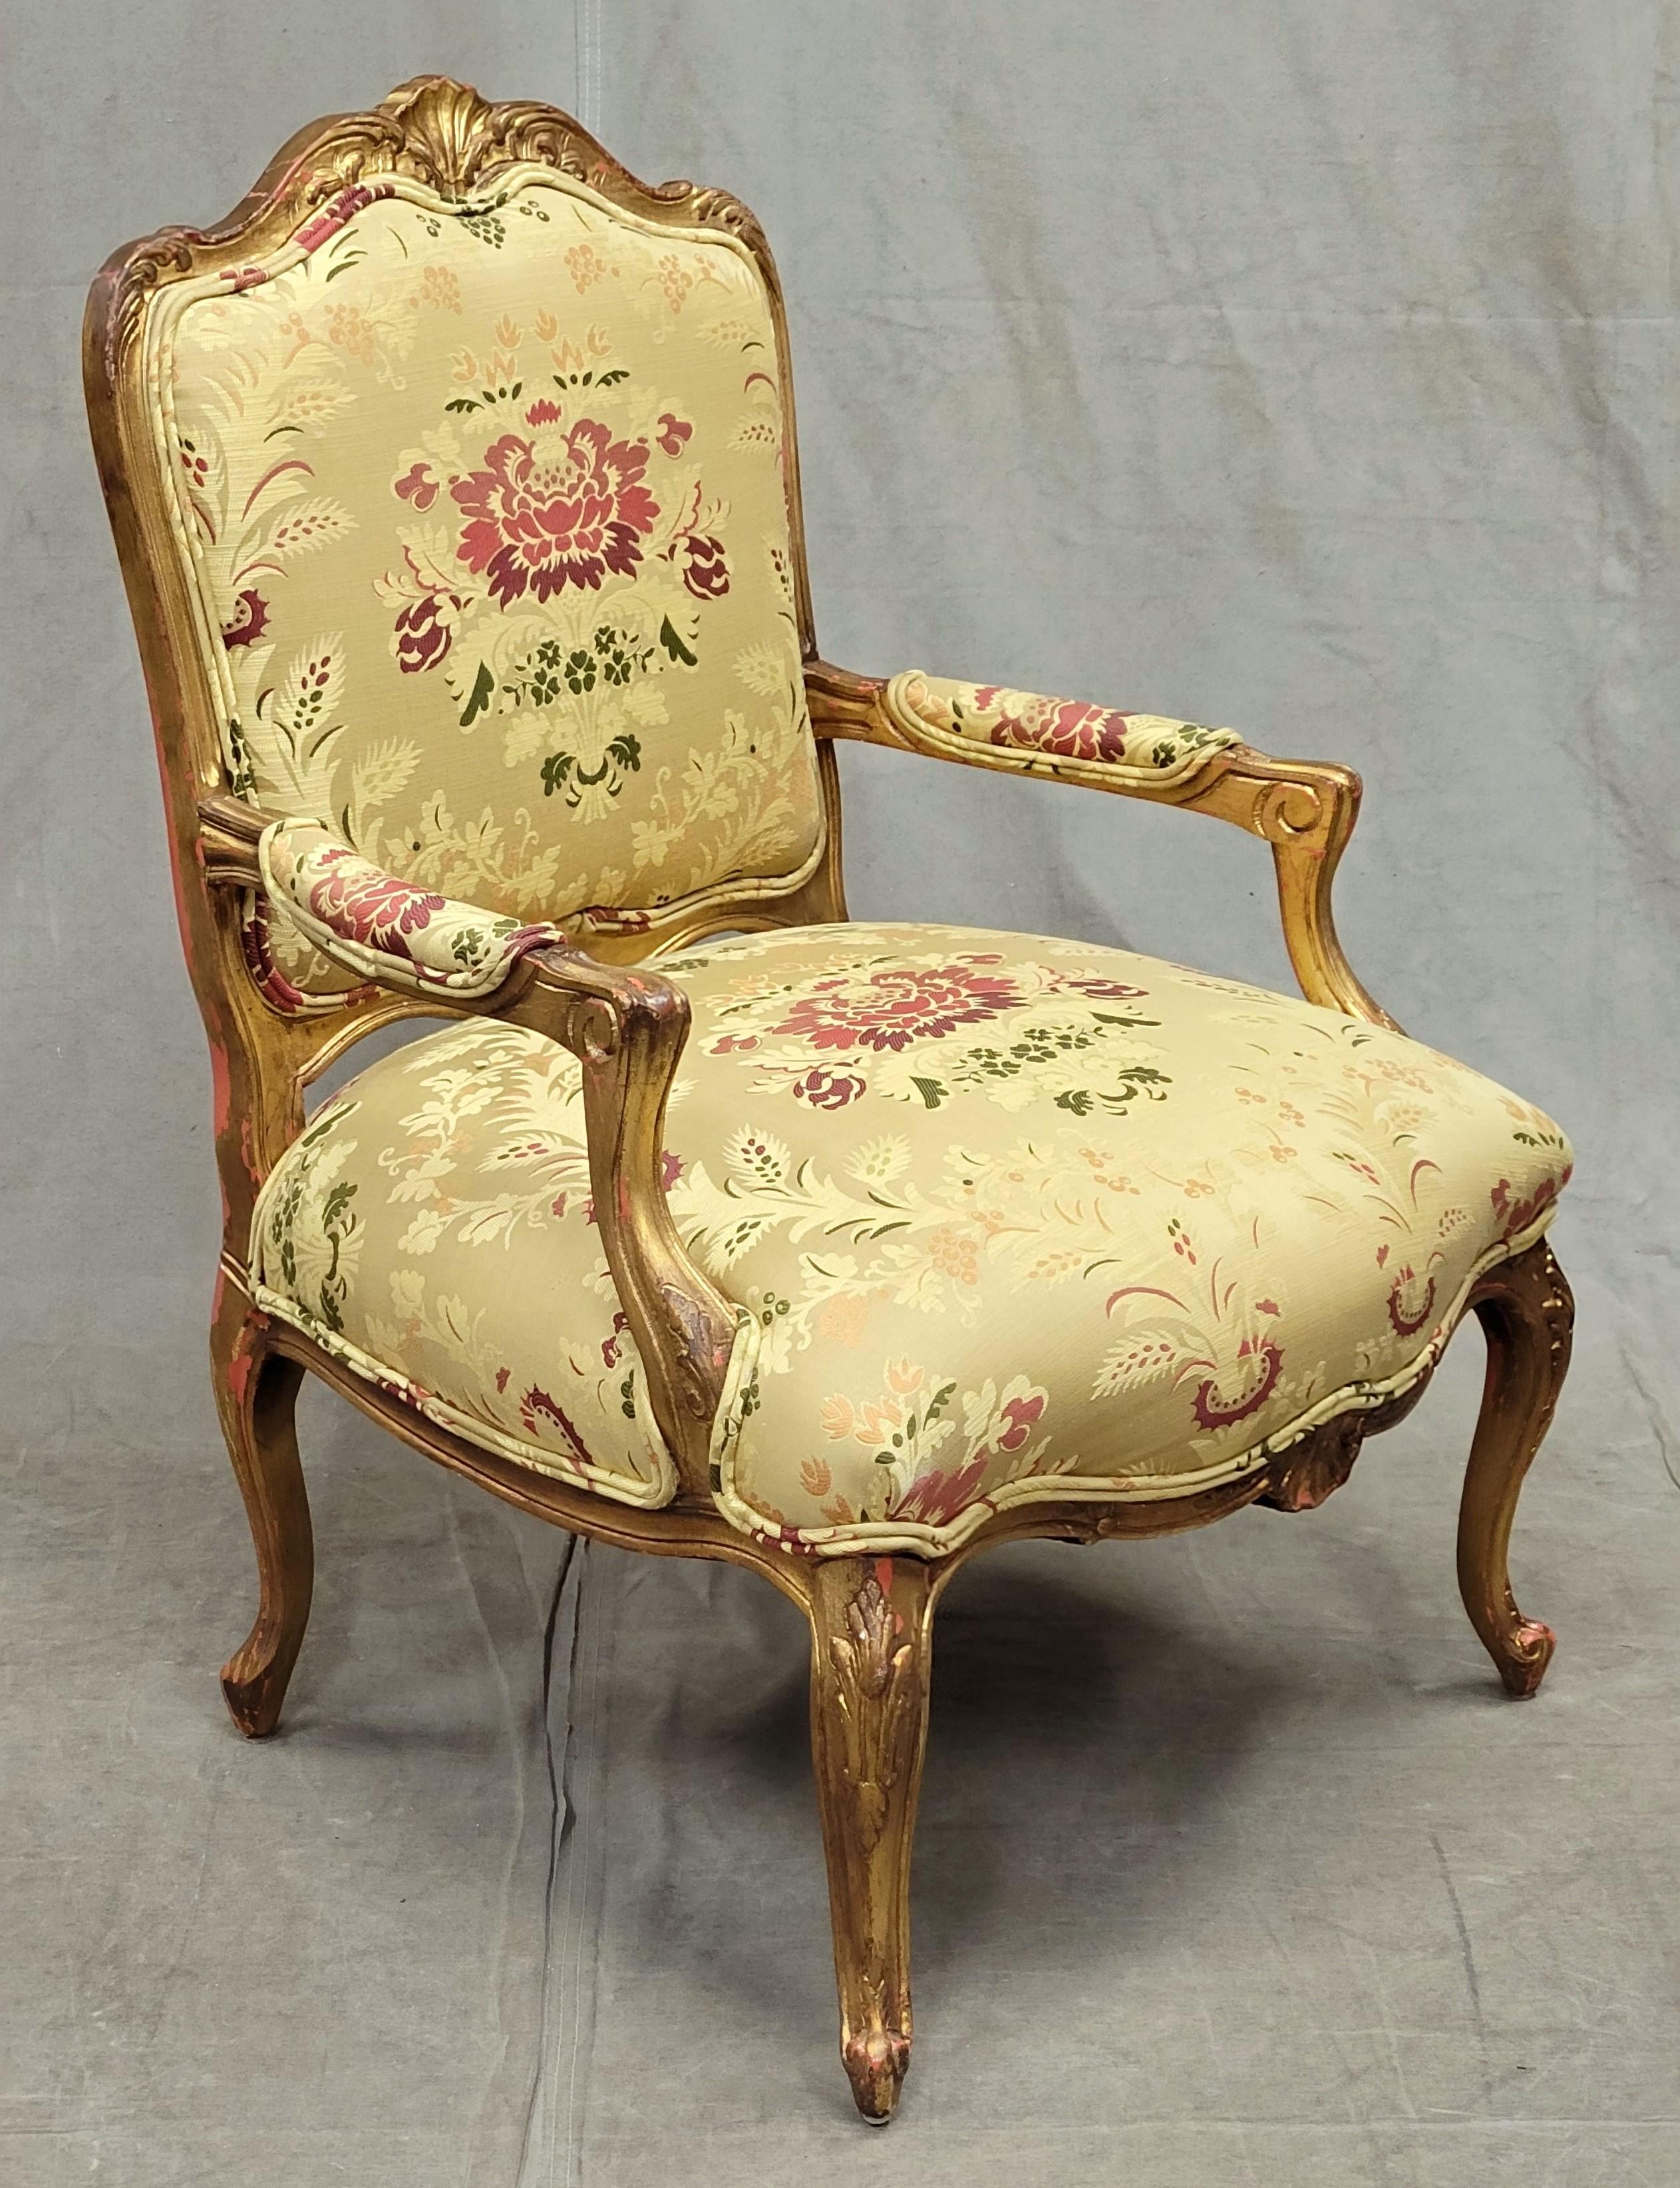 Louis XV Vintage French Gold Leaf Bergere Chairs With Designer Damask Upholstery - a Pair